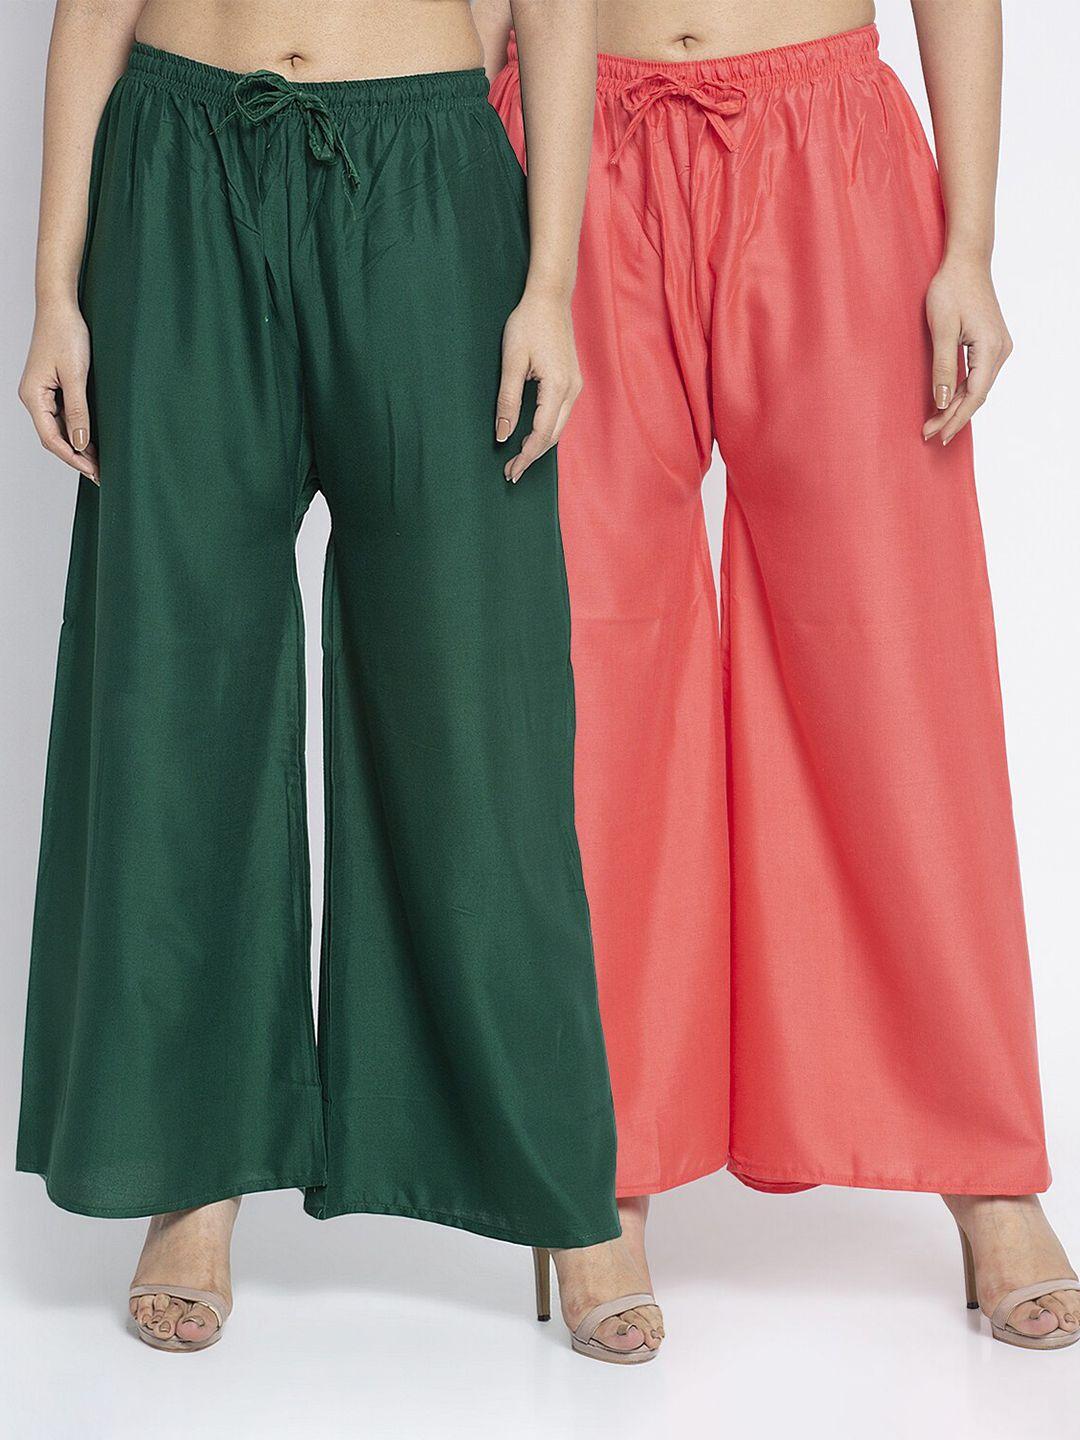 gracit women pack of 2 green & peach-coloured ethnic palazzos